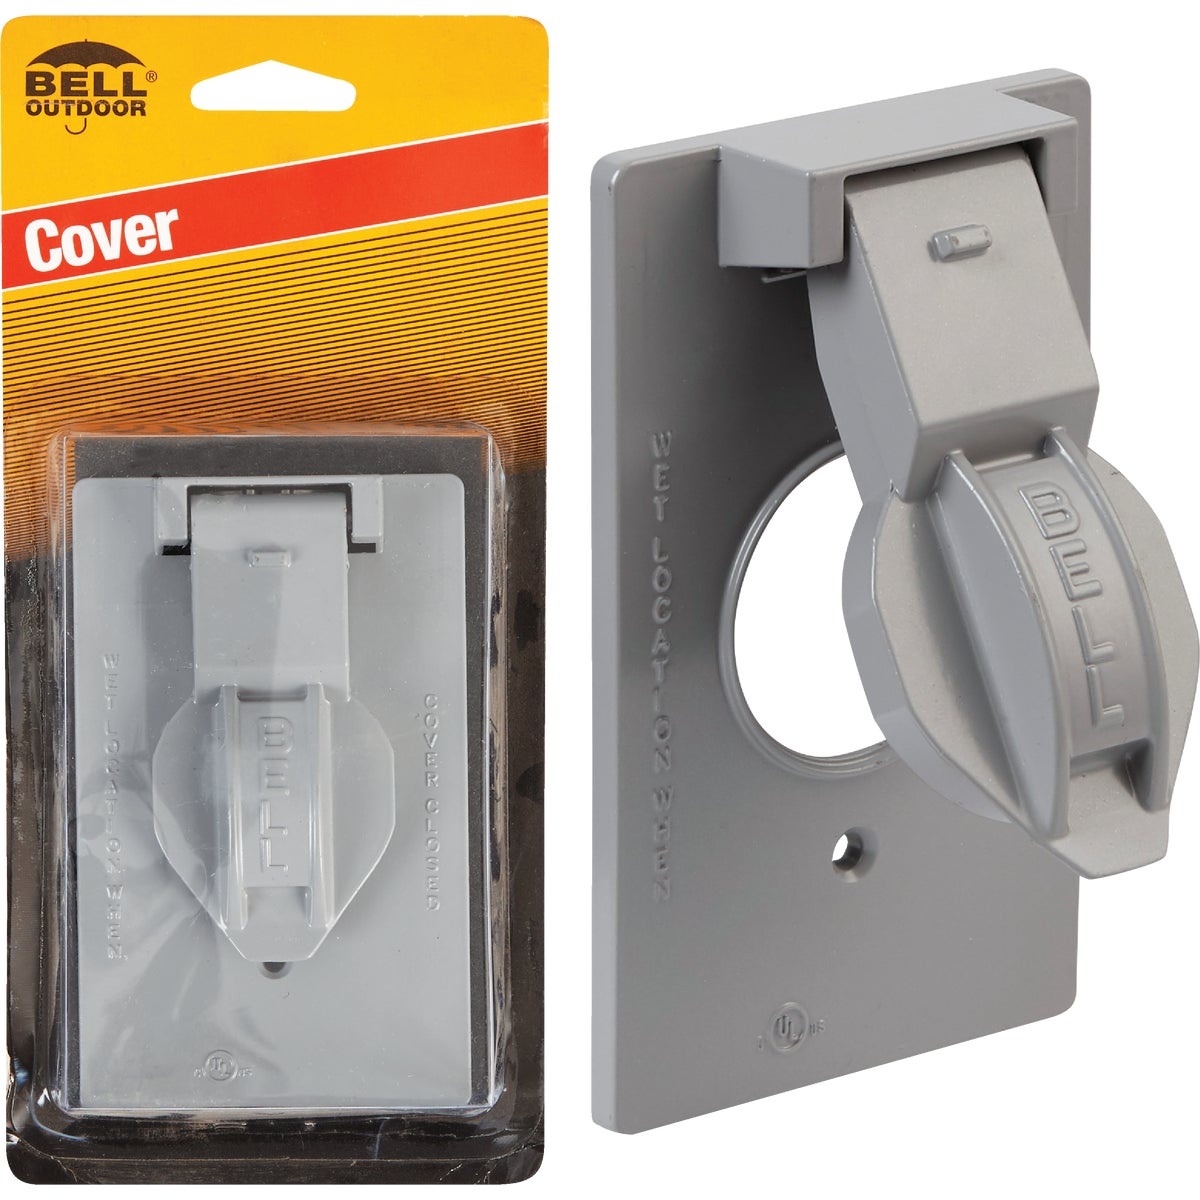 Item 514081, Device-mounted vertical cover for single receptacle, 1.406-inch diameter.